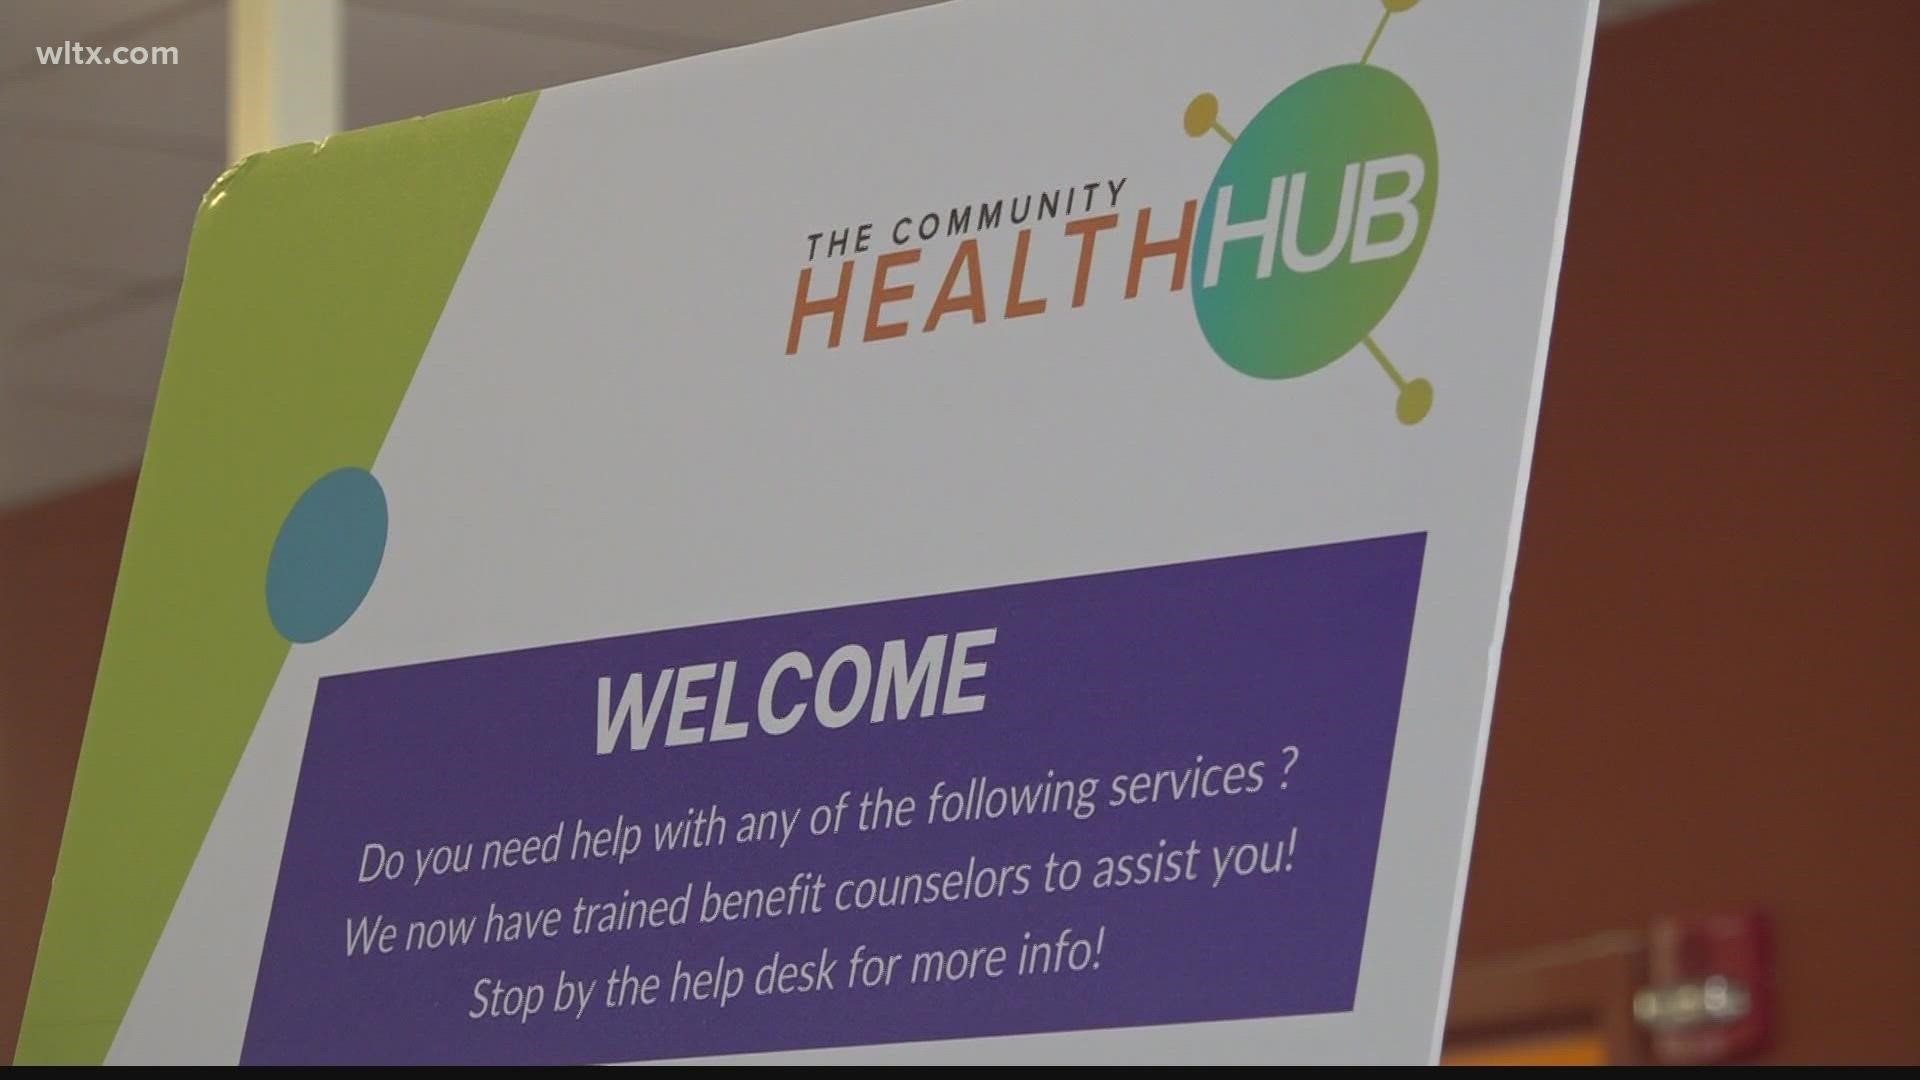 A free community health hub is working to provide more access to healthcare, one client at a time.